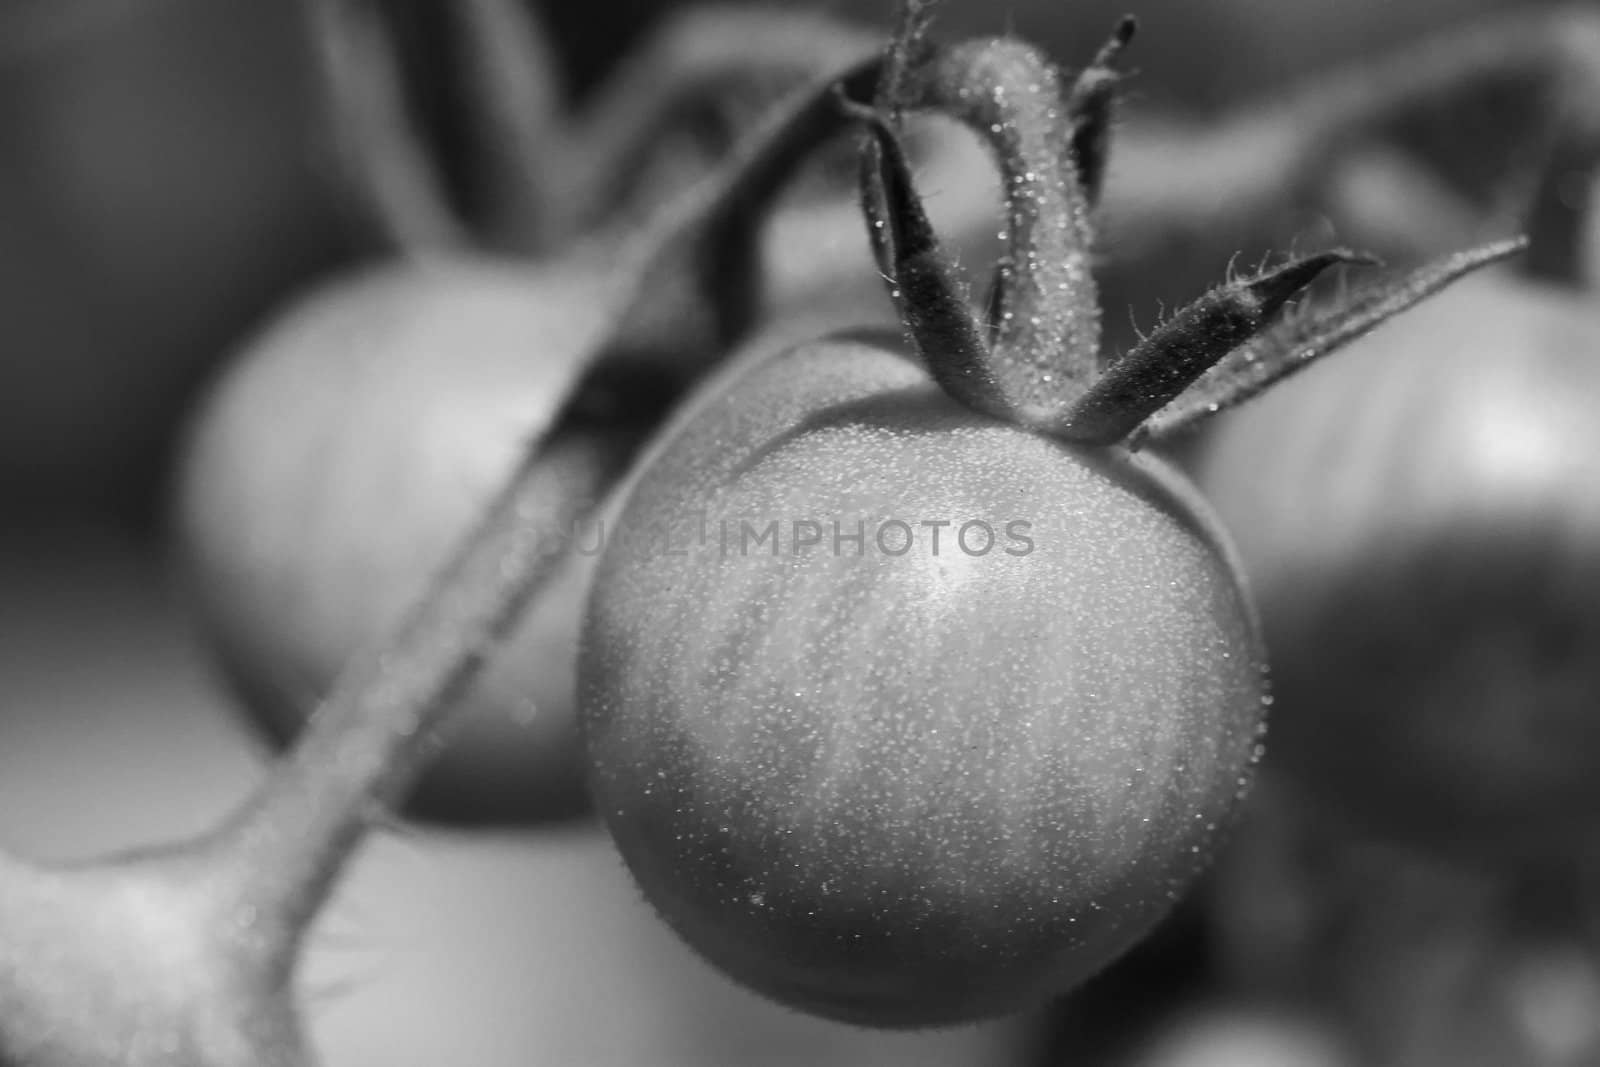 Single small tomato with soft background of other tomatoes done in black and white